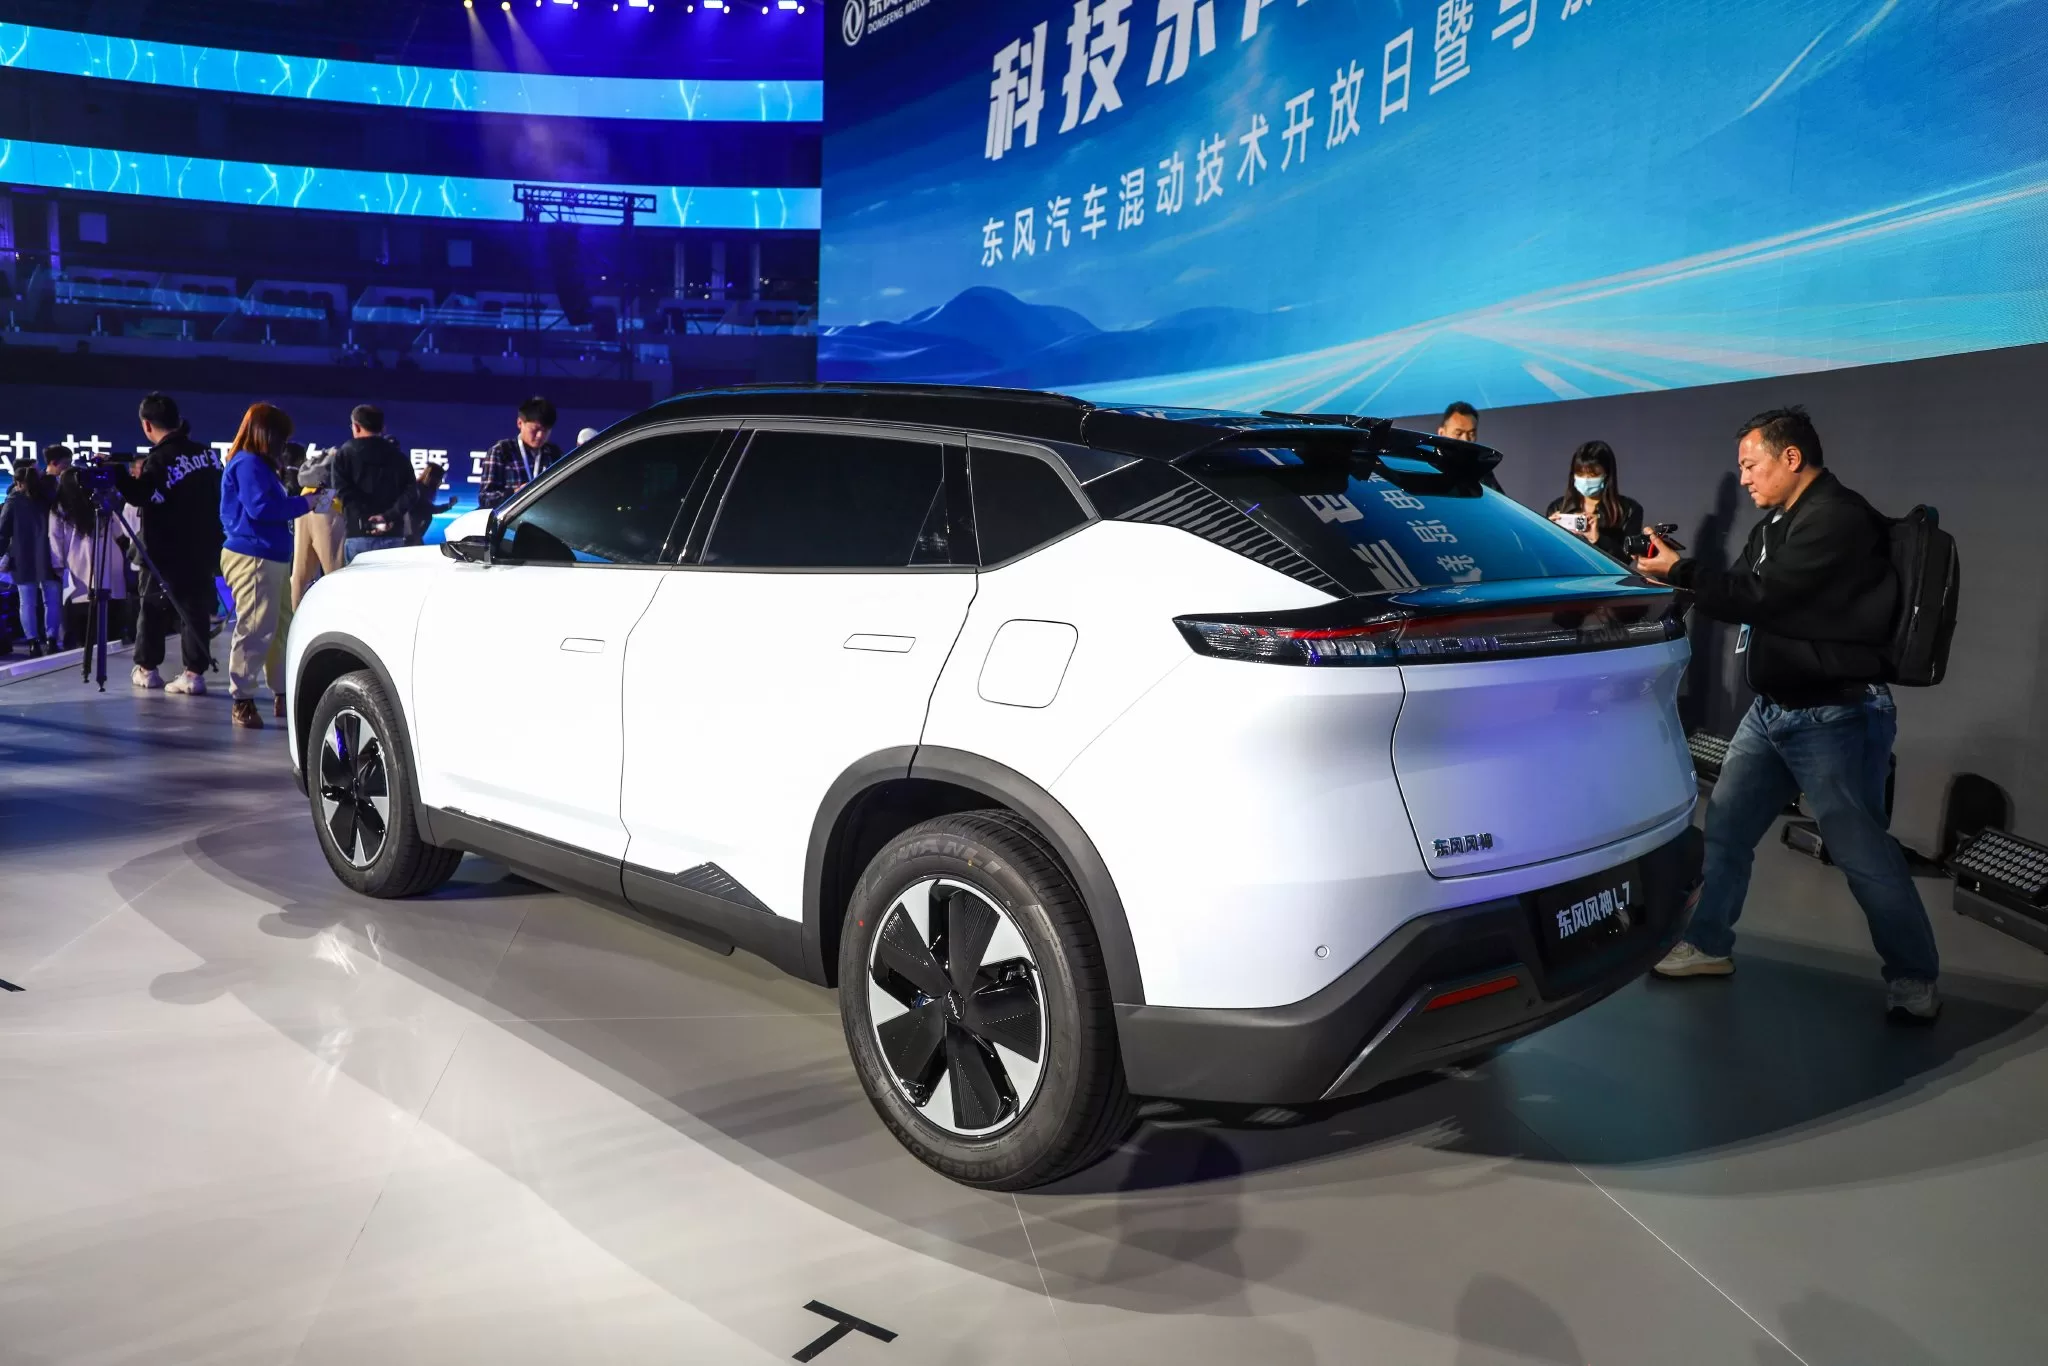 Dongfeng Fengshen L7: Unveiling the Stylish Hybrid SUV with PHREV Technology